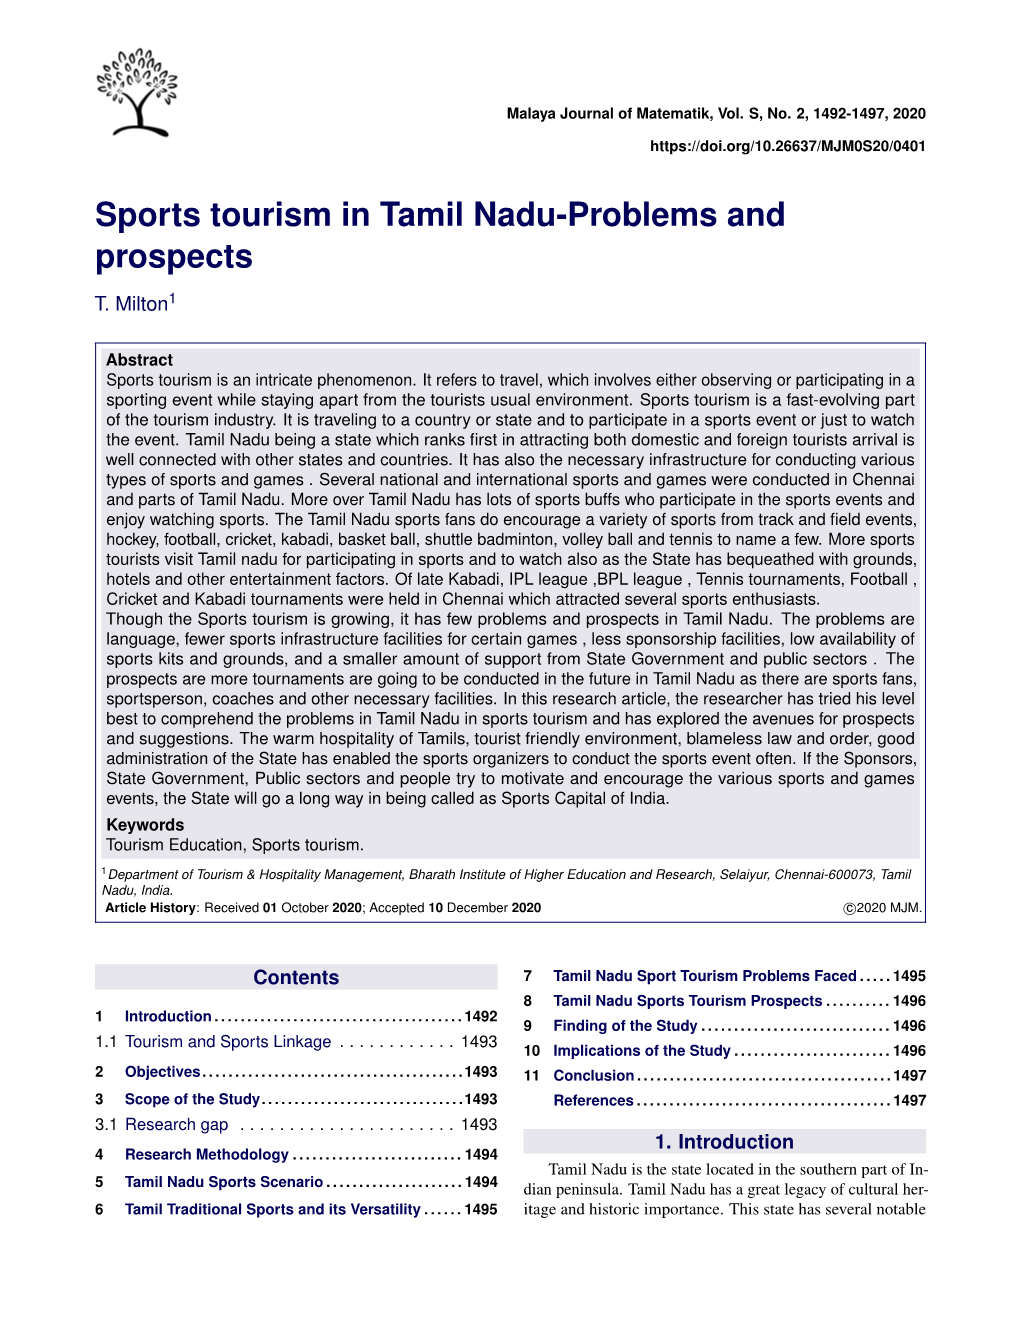 Sports Tourism in Tamil Nadu-Problems and Prospects